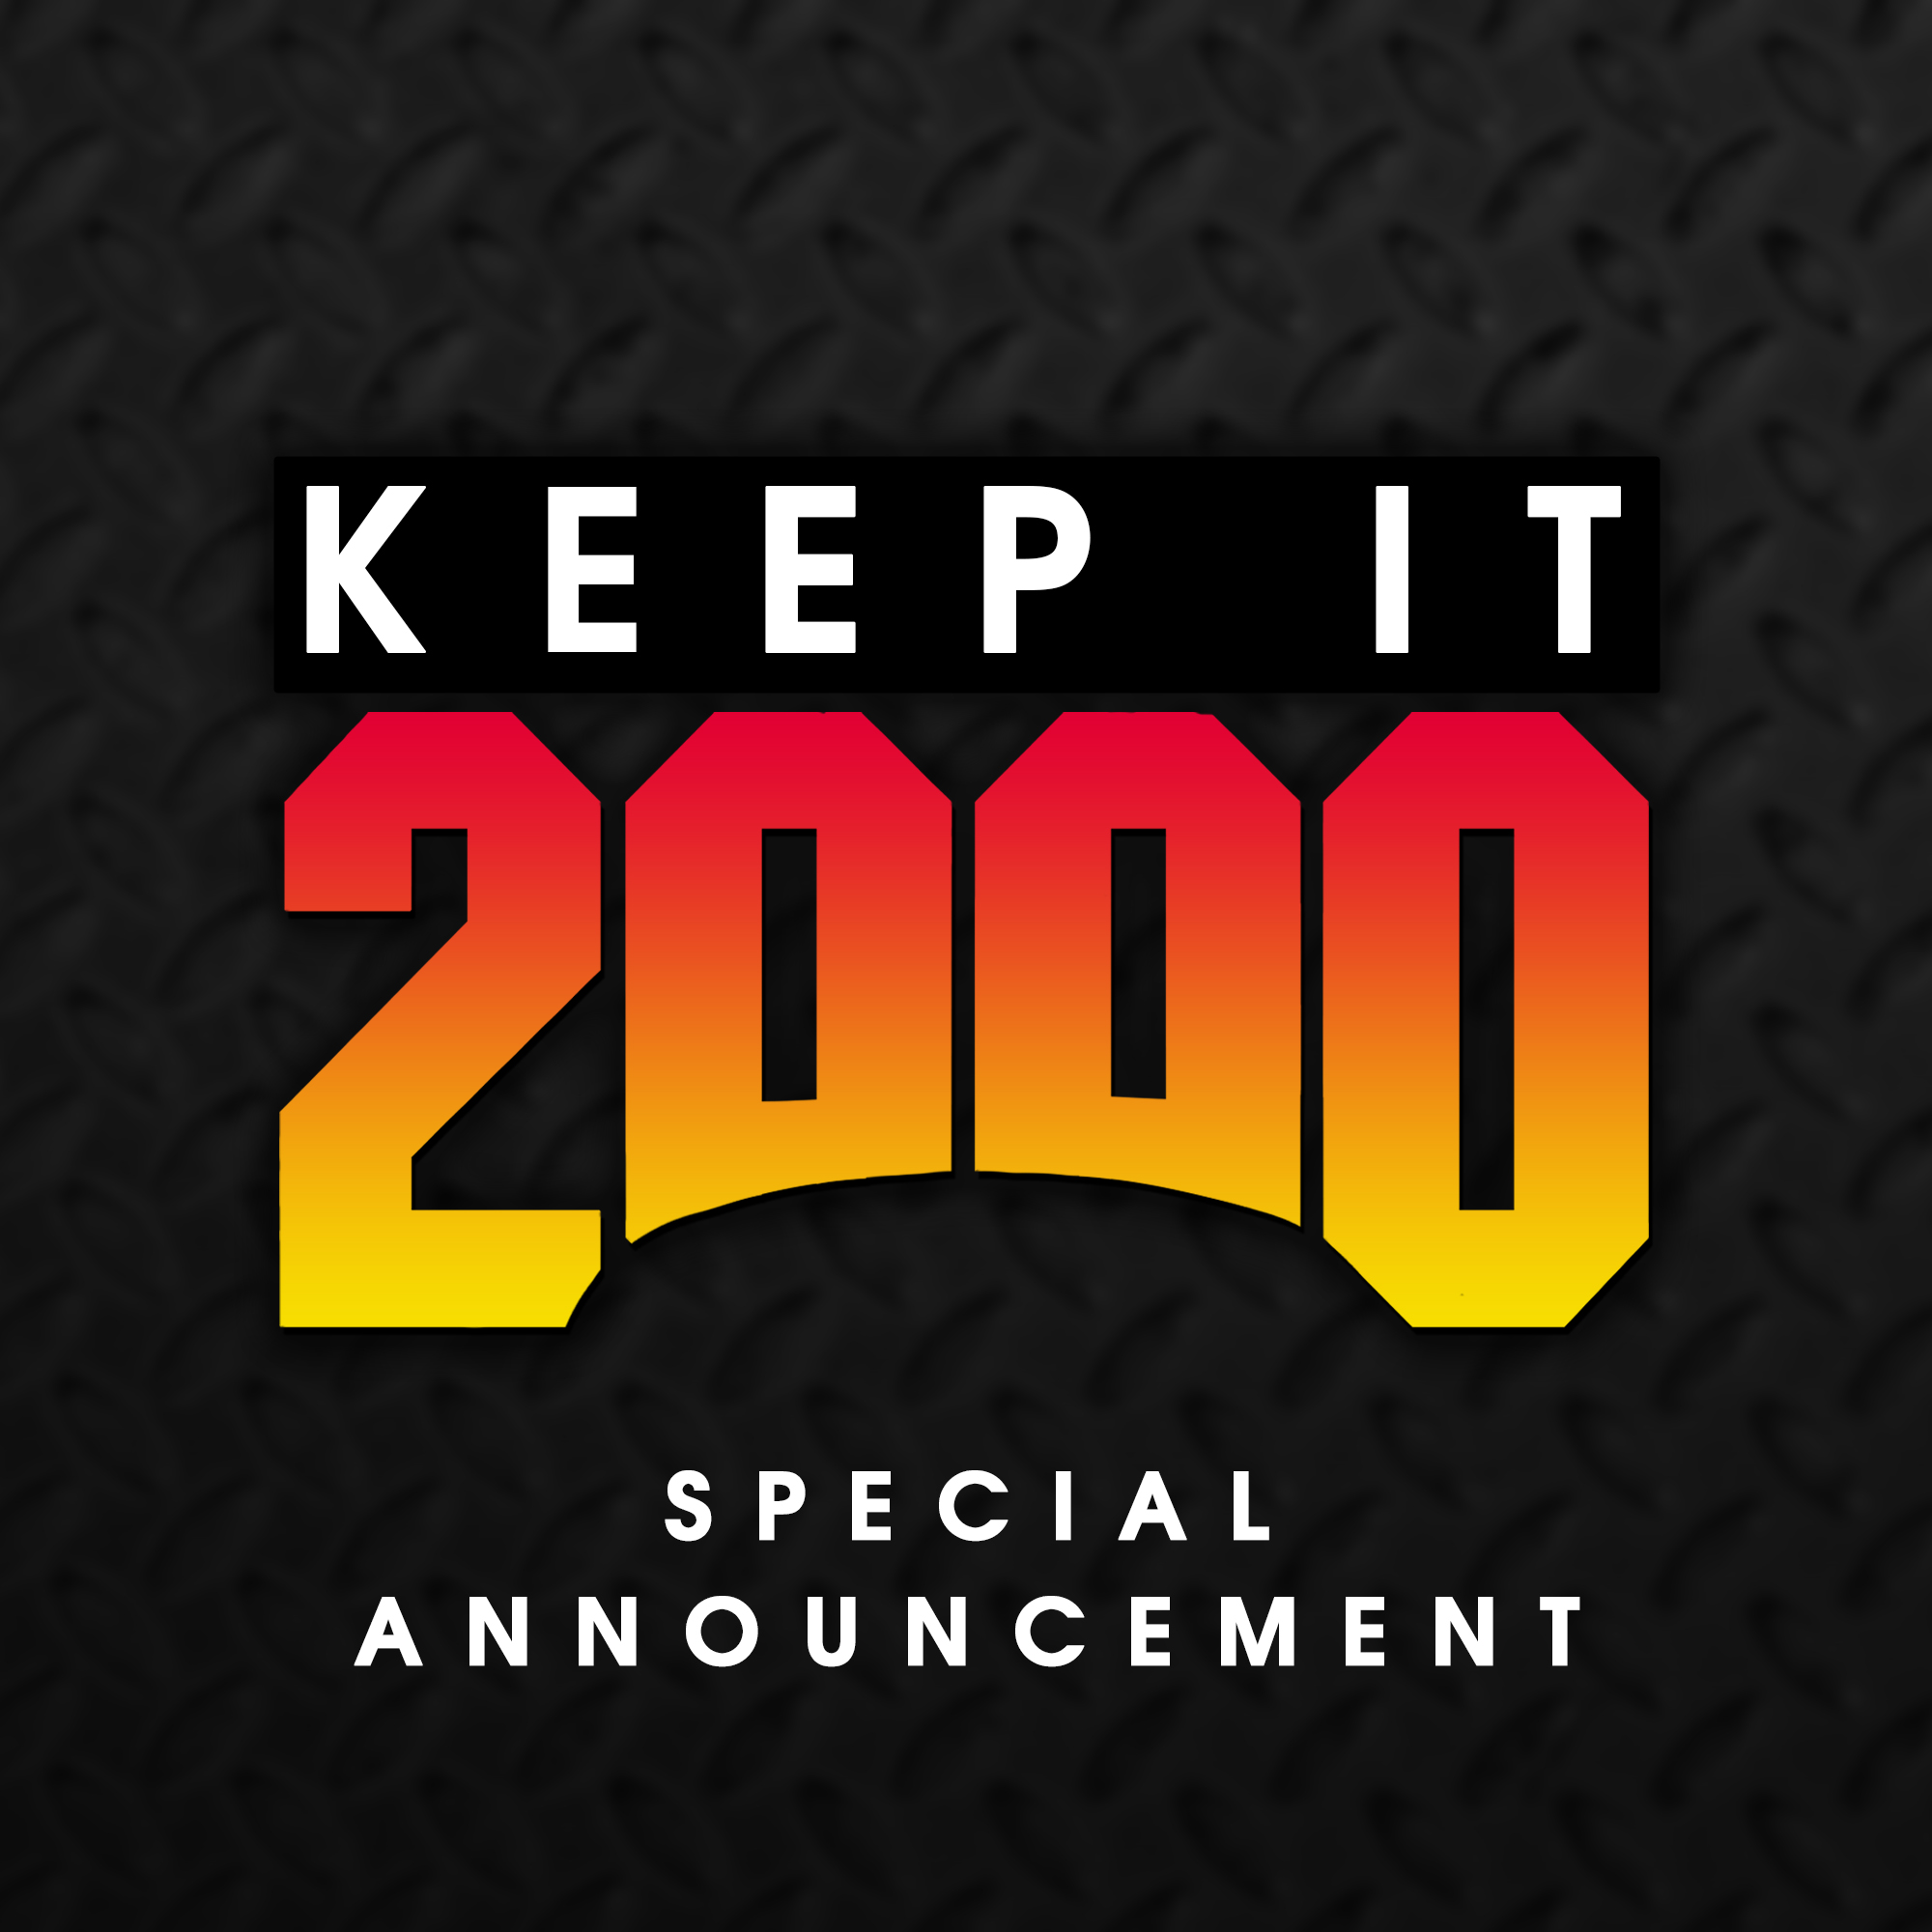 KEEP IT 2000 SPECIAL ANNOUNCEMENT